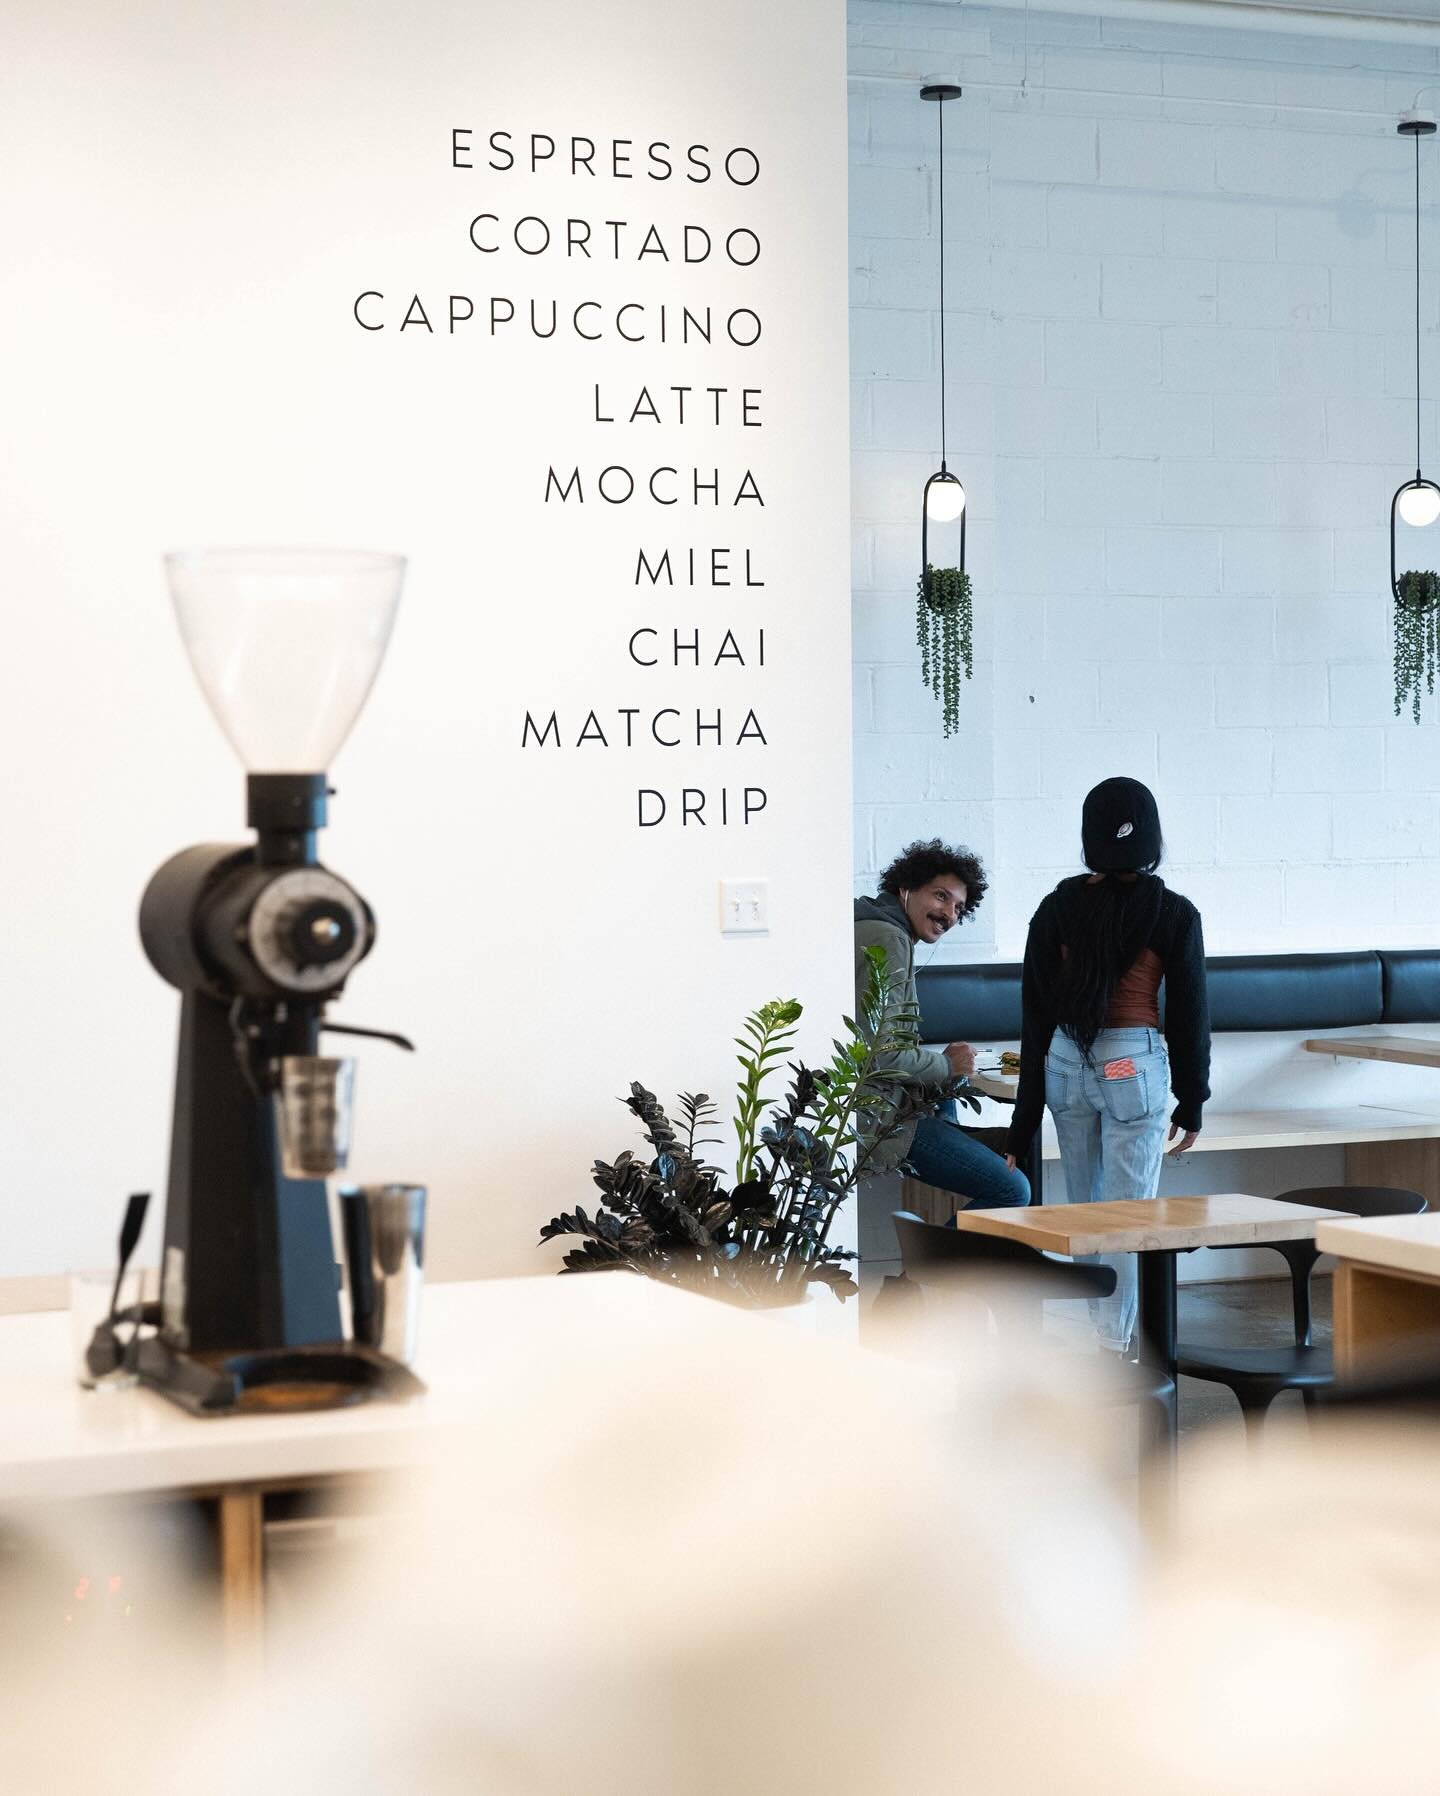 Come to connect and enjoy a drink.

Our space is open to all, Mon-Sat 7a-5p!

#coalescencecoffee